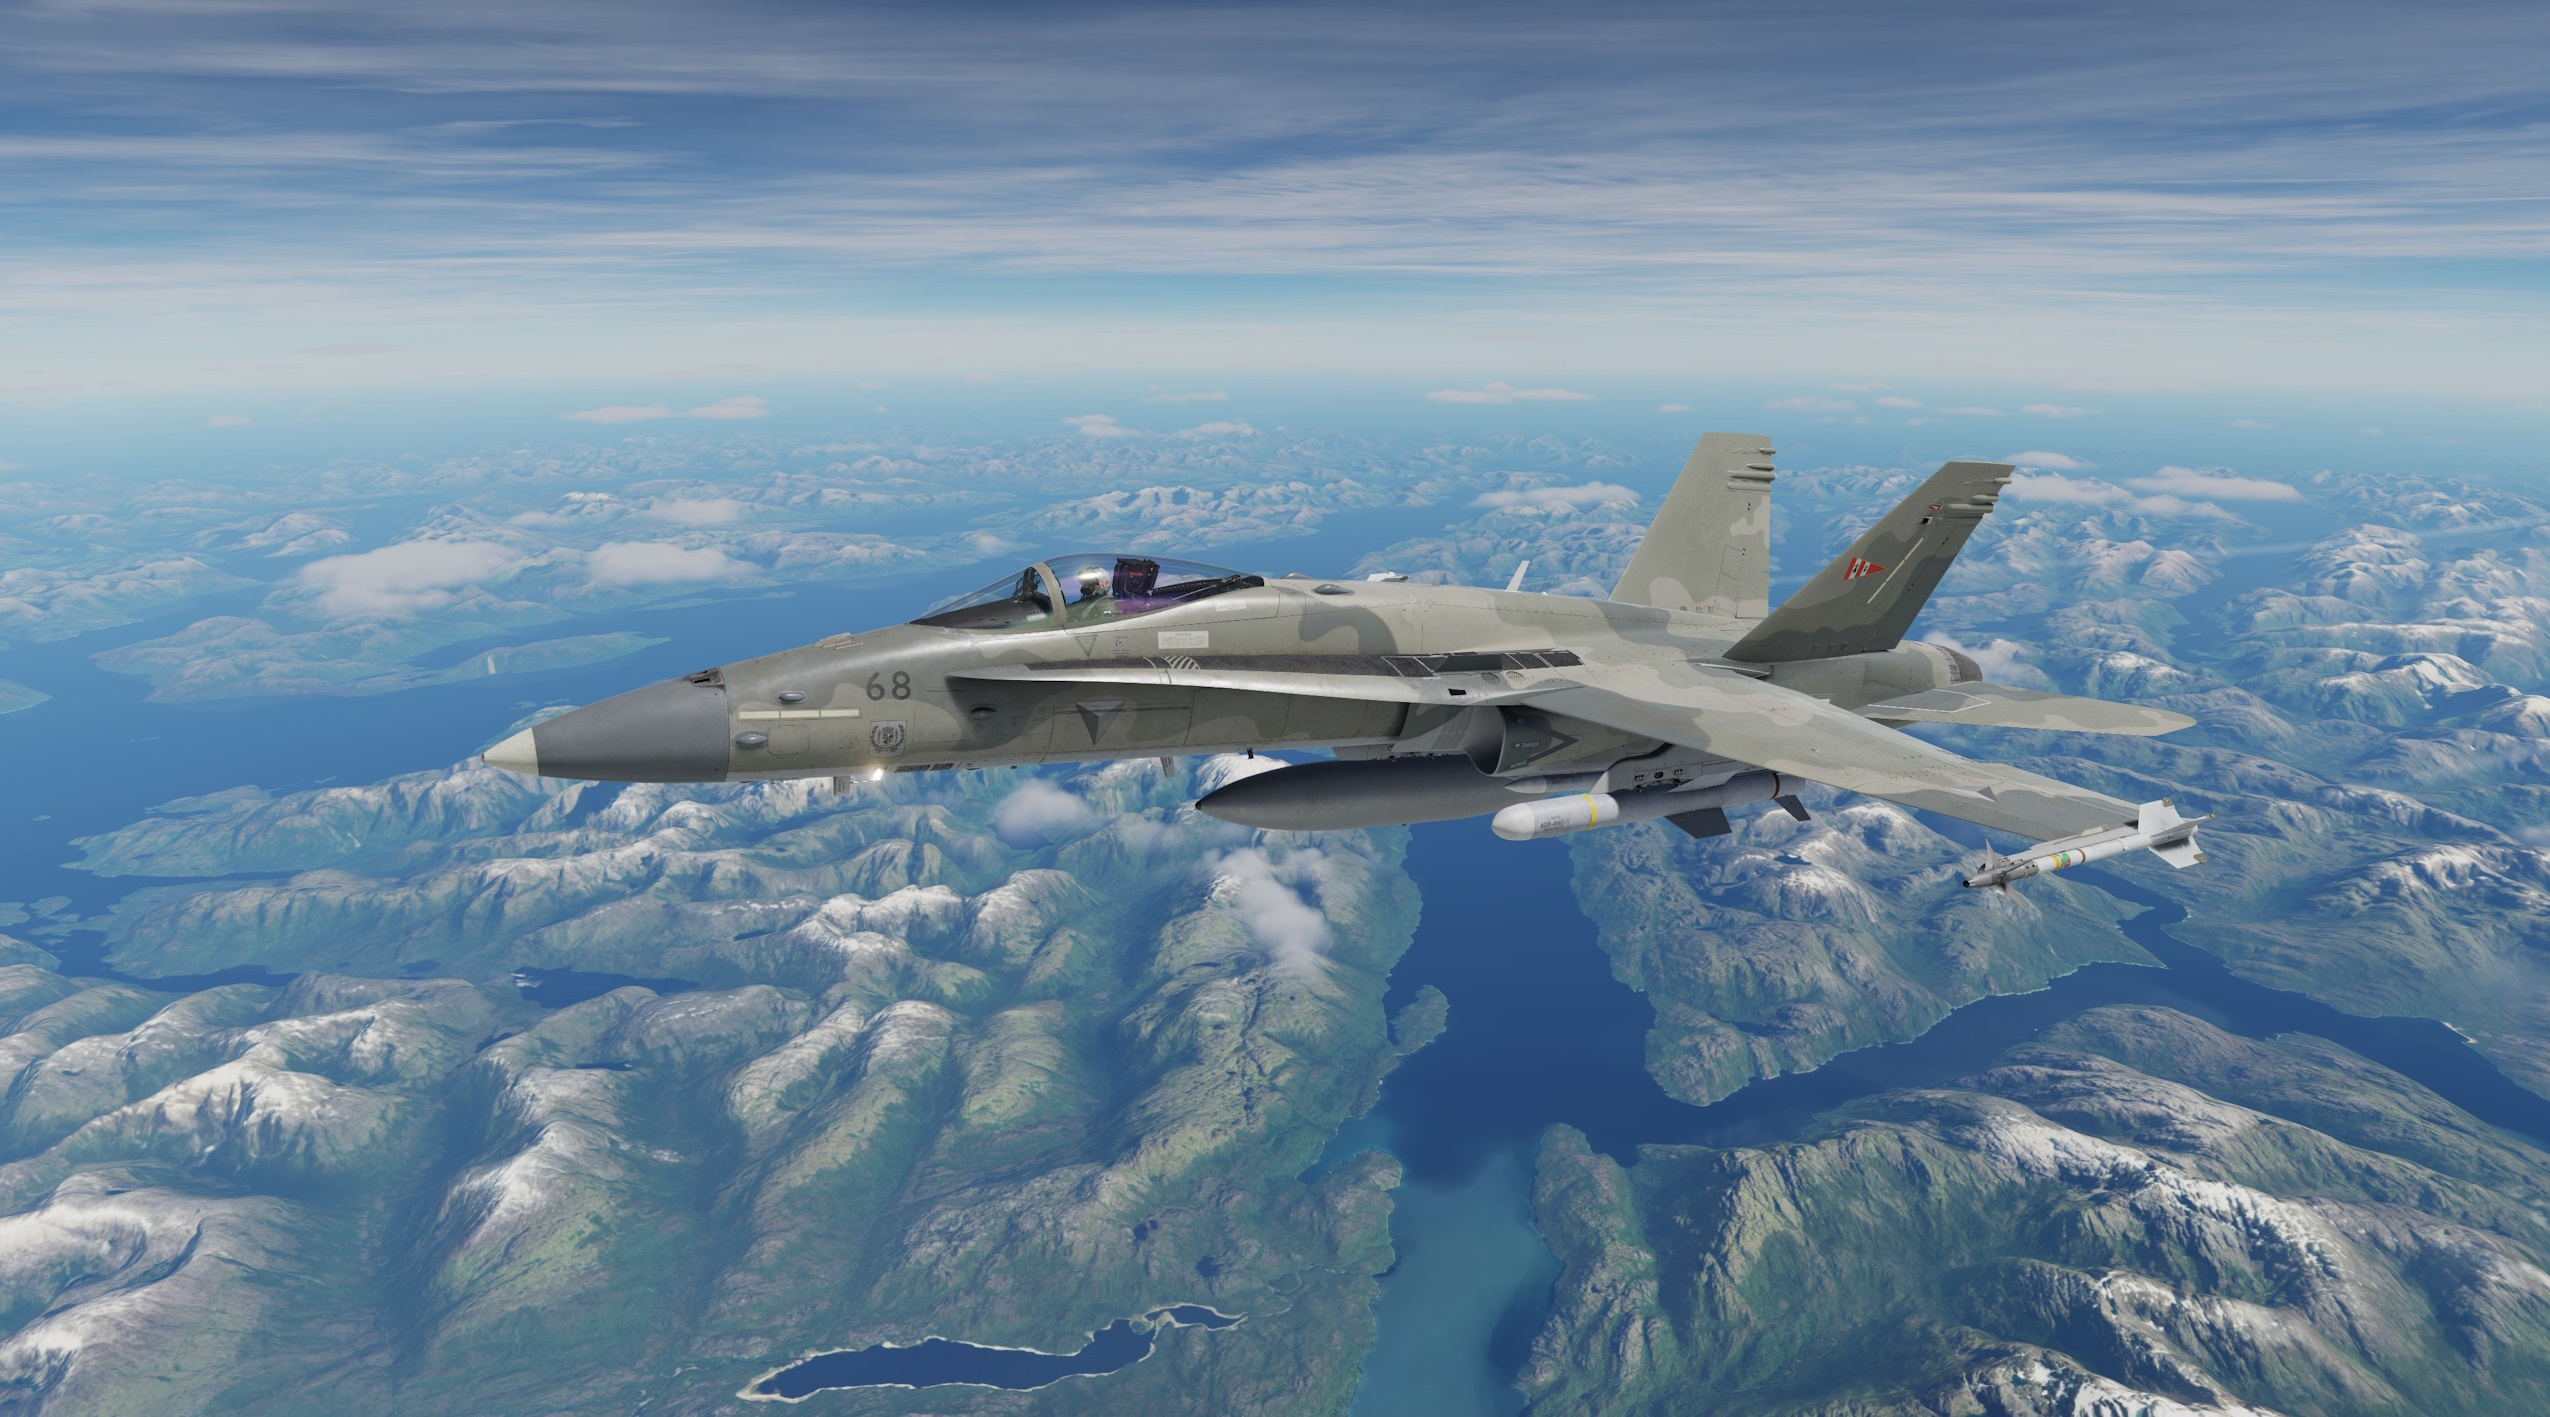 ACE COMBAT - F-18C - Nordennavic Royal Air Force - Sqn "Vosges" V1.2 SPA97 only